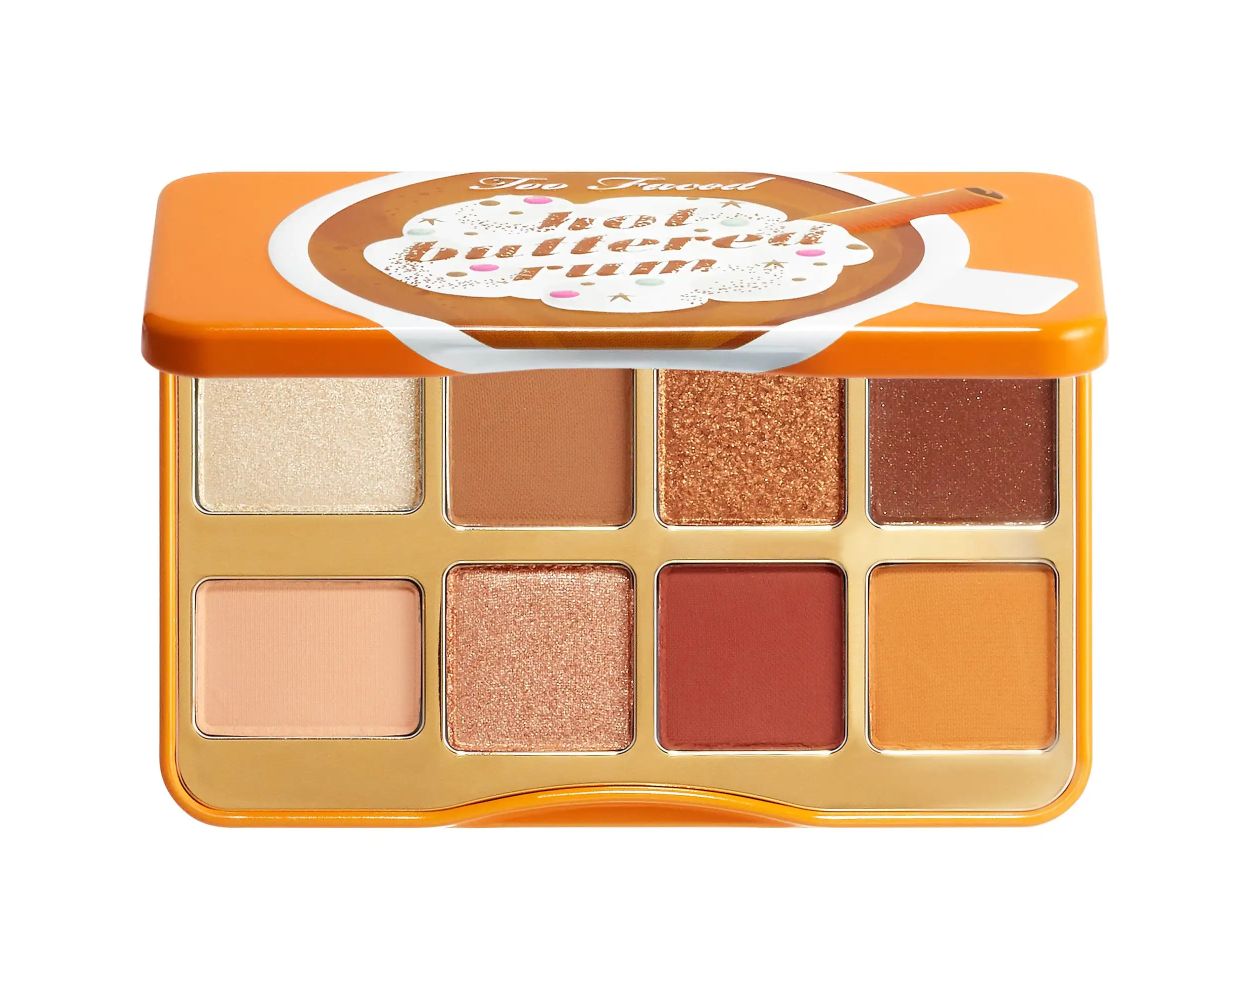 Too Faced Hot Buttered Rum Eyeshadow Palette Limited Holiday Edition - AllurebeautypkToo Faced Hot Buttered Rum Eyeshadow Palette Limited Holiday Edition